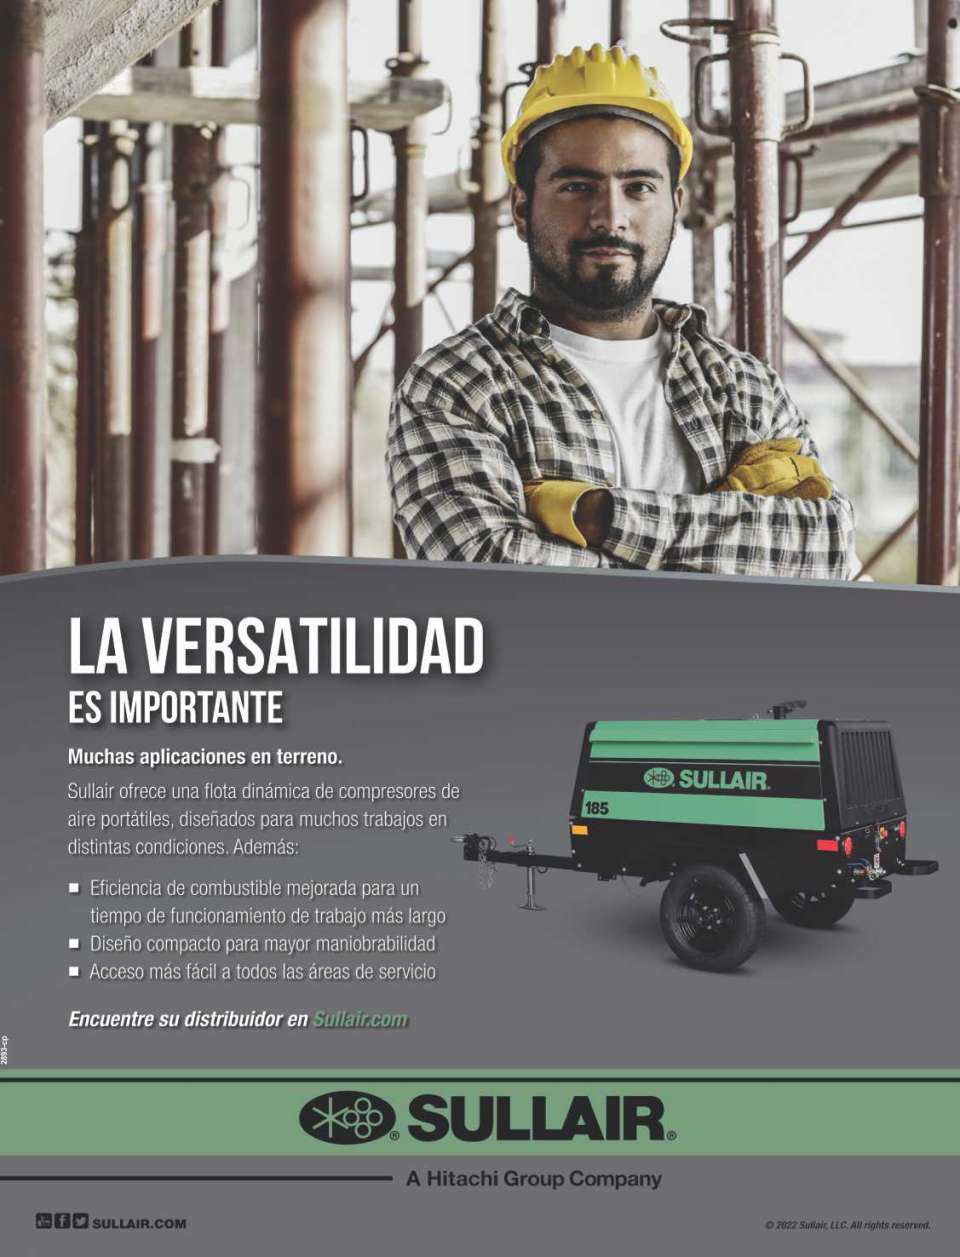 Sullair portable screw compressors are developed expertly to offer superior accessibility, providing maximum performance for the work entrusted.